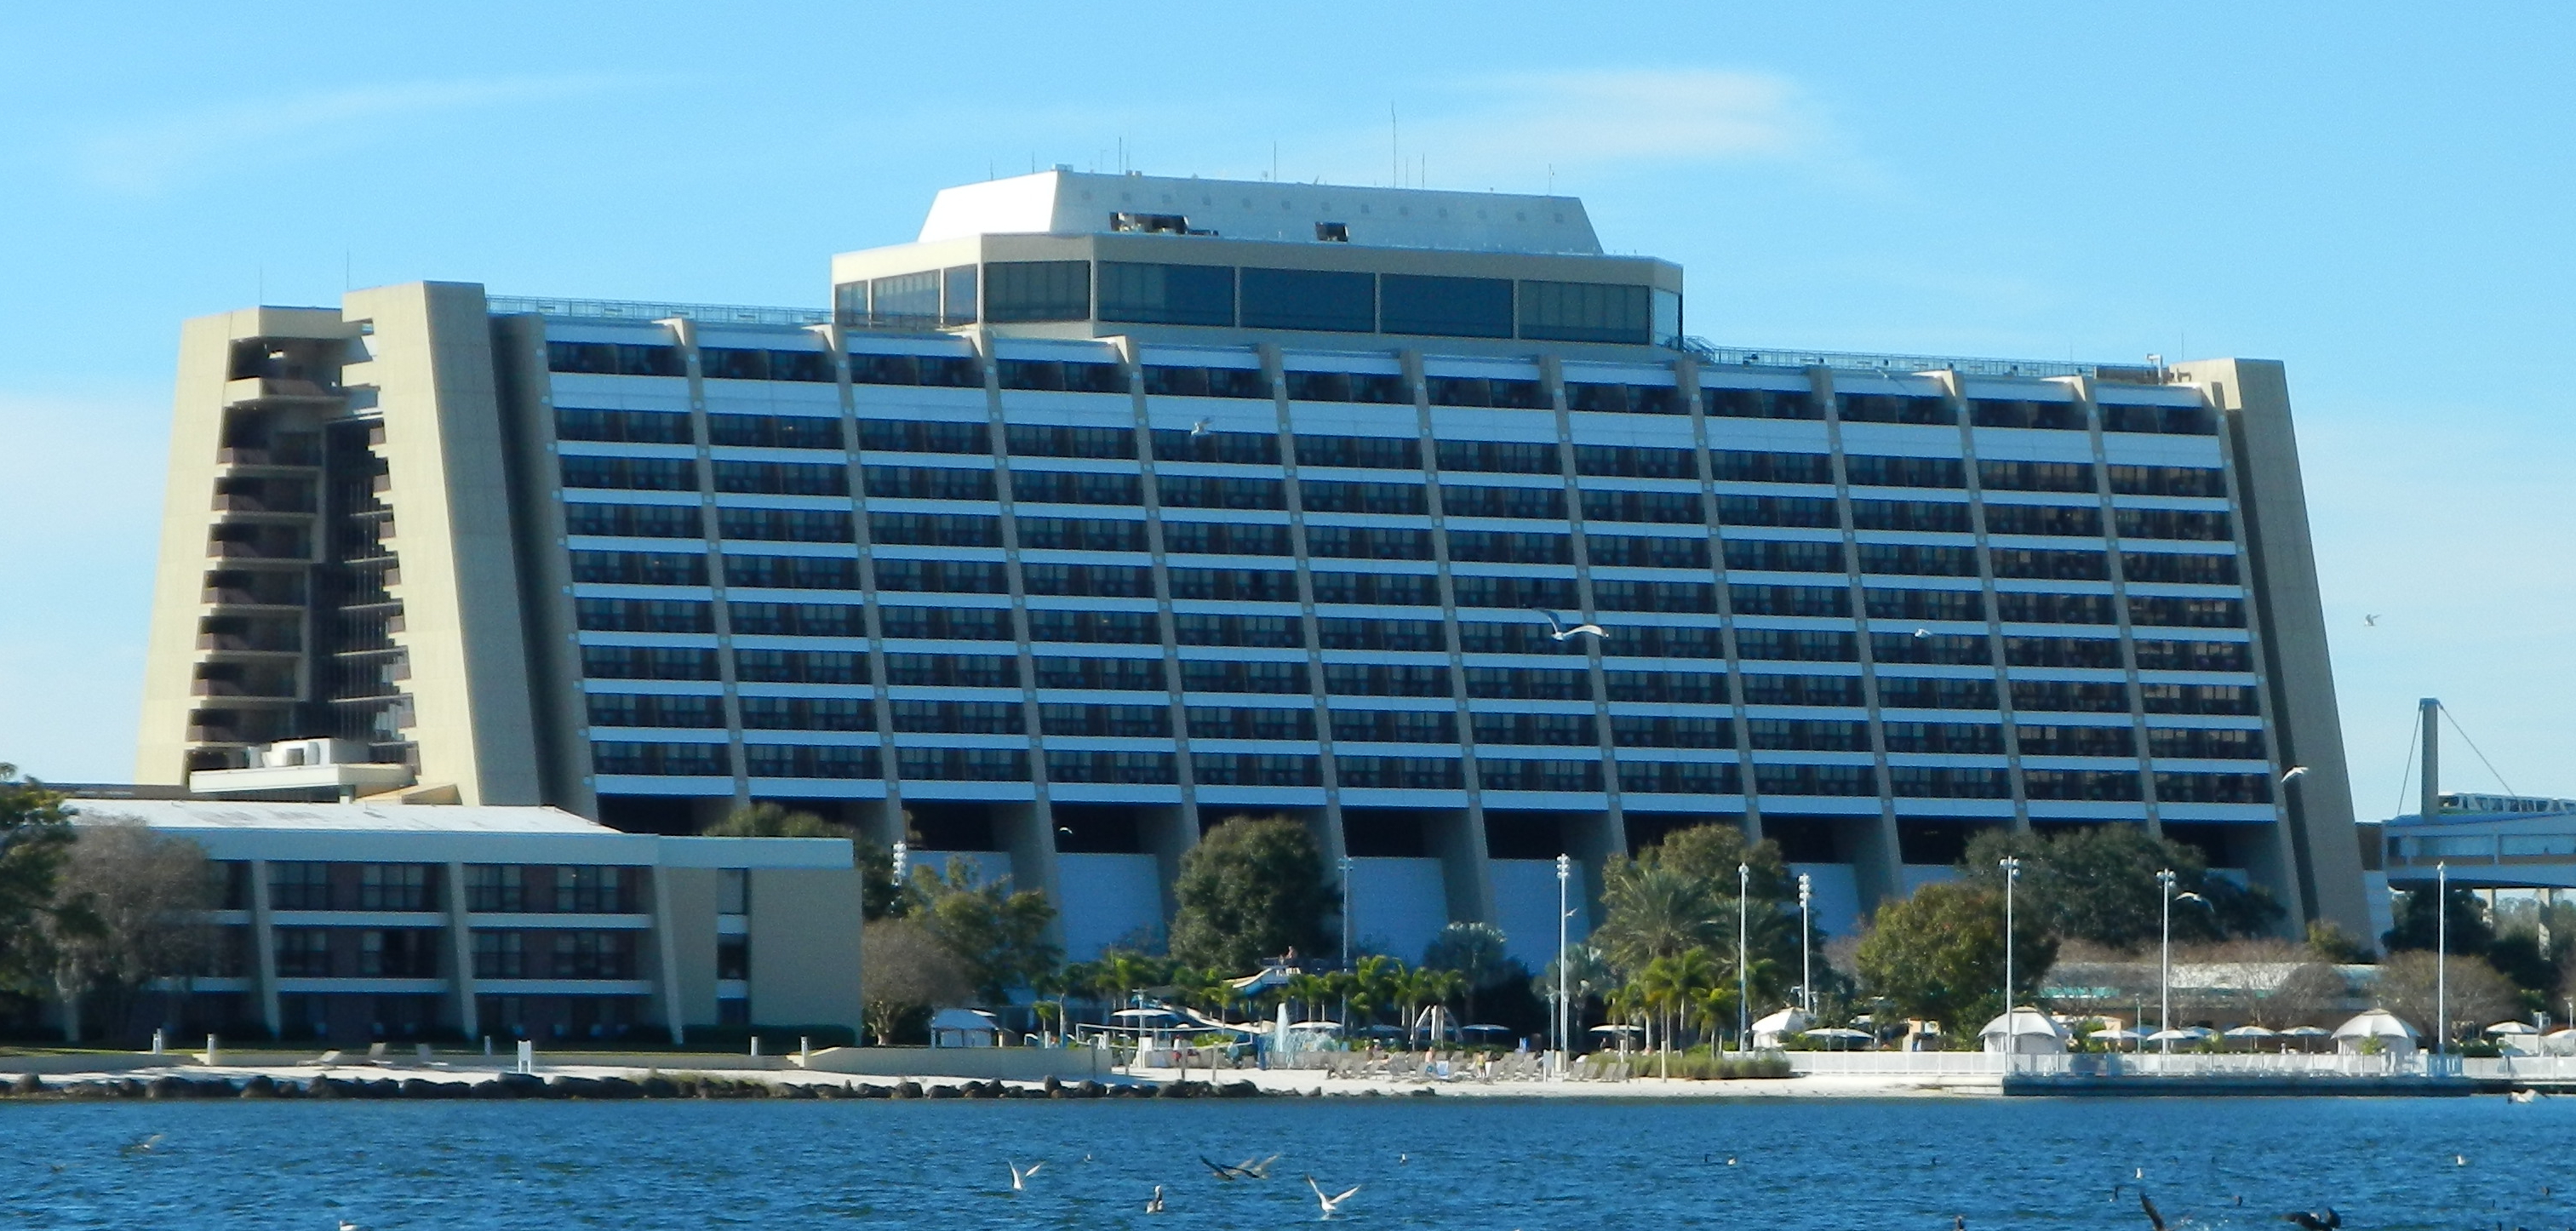 This was our view of the Contemporary Resort from our boat ride to the Magic Kingdom.